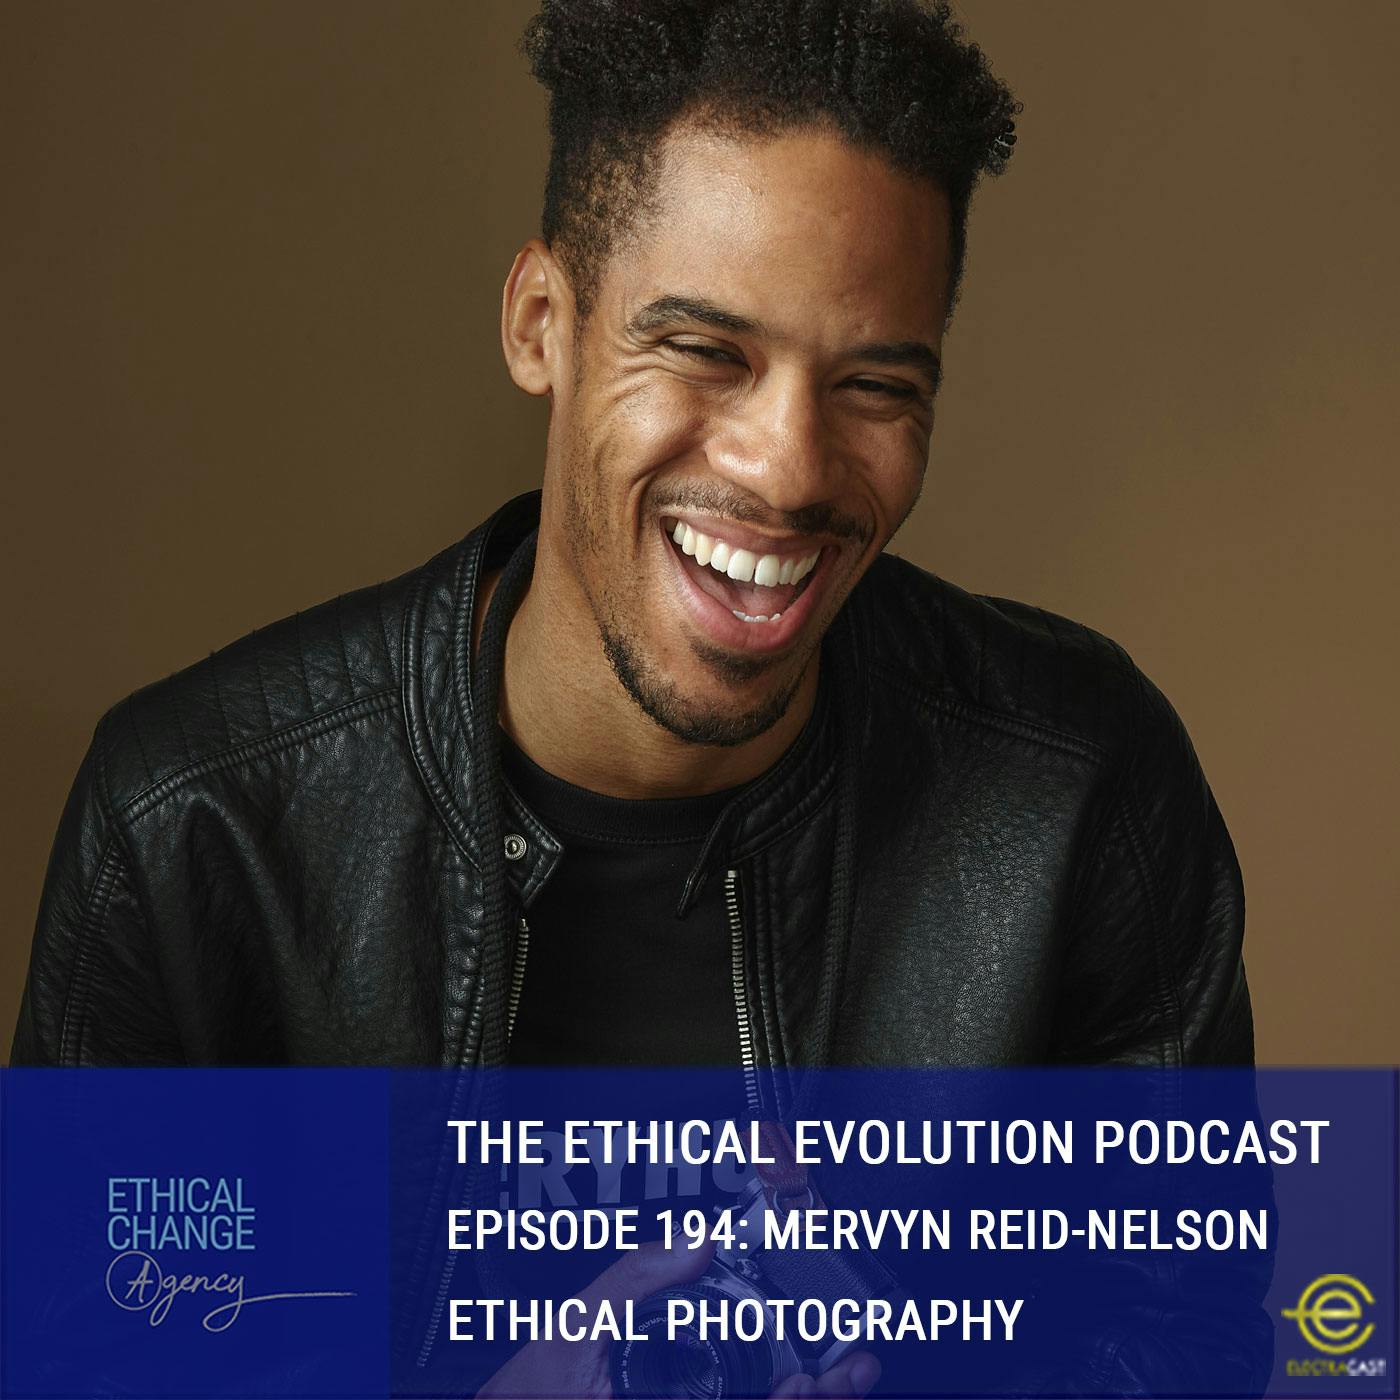 Ethical Photography with Mervyn Reid-Nelson